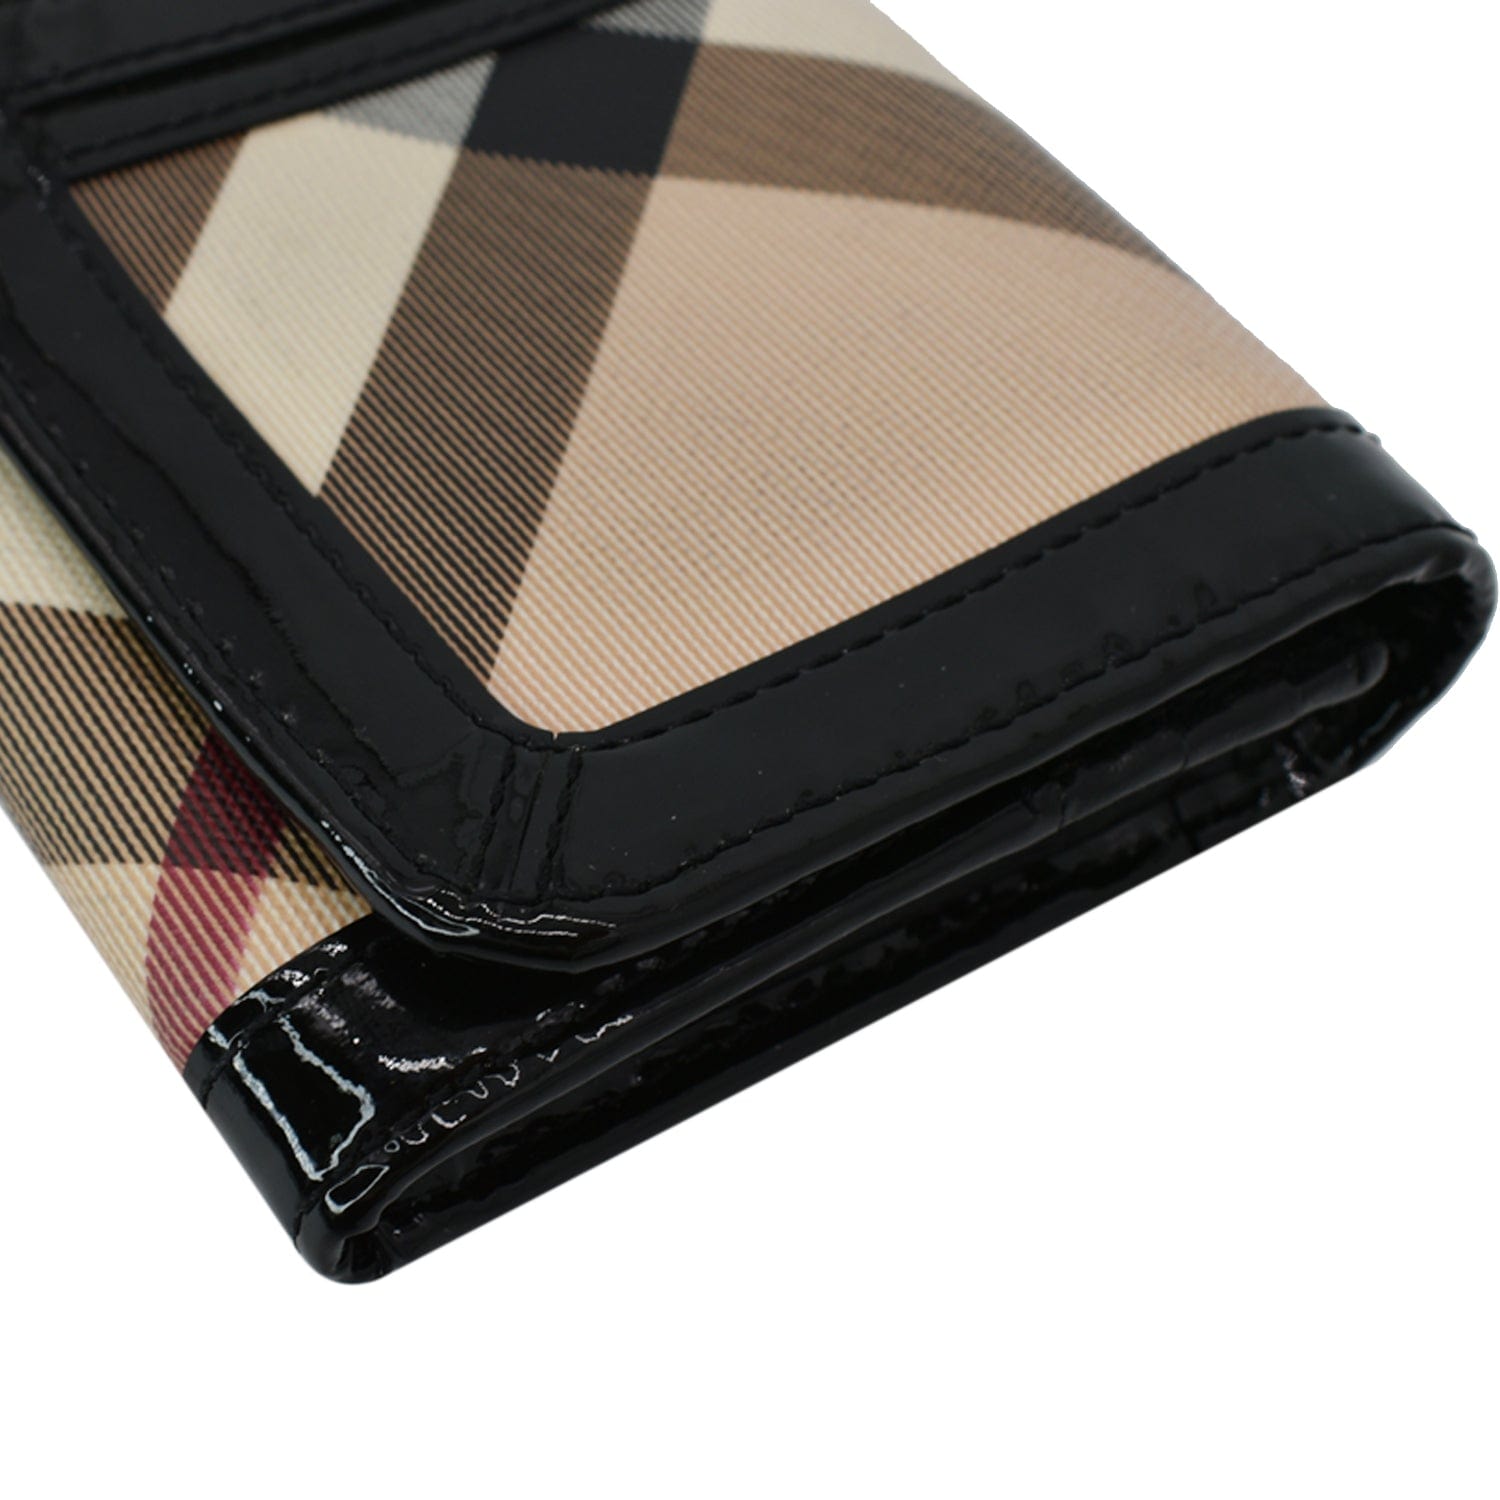 Burberry Black Leather Plaid Print Continental Wallet